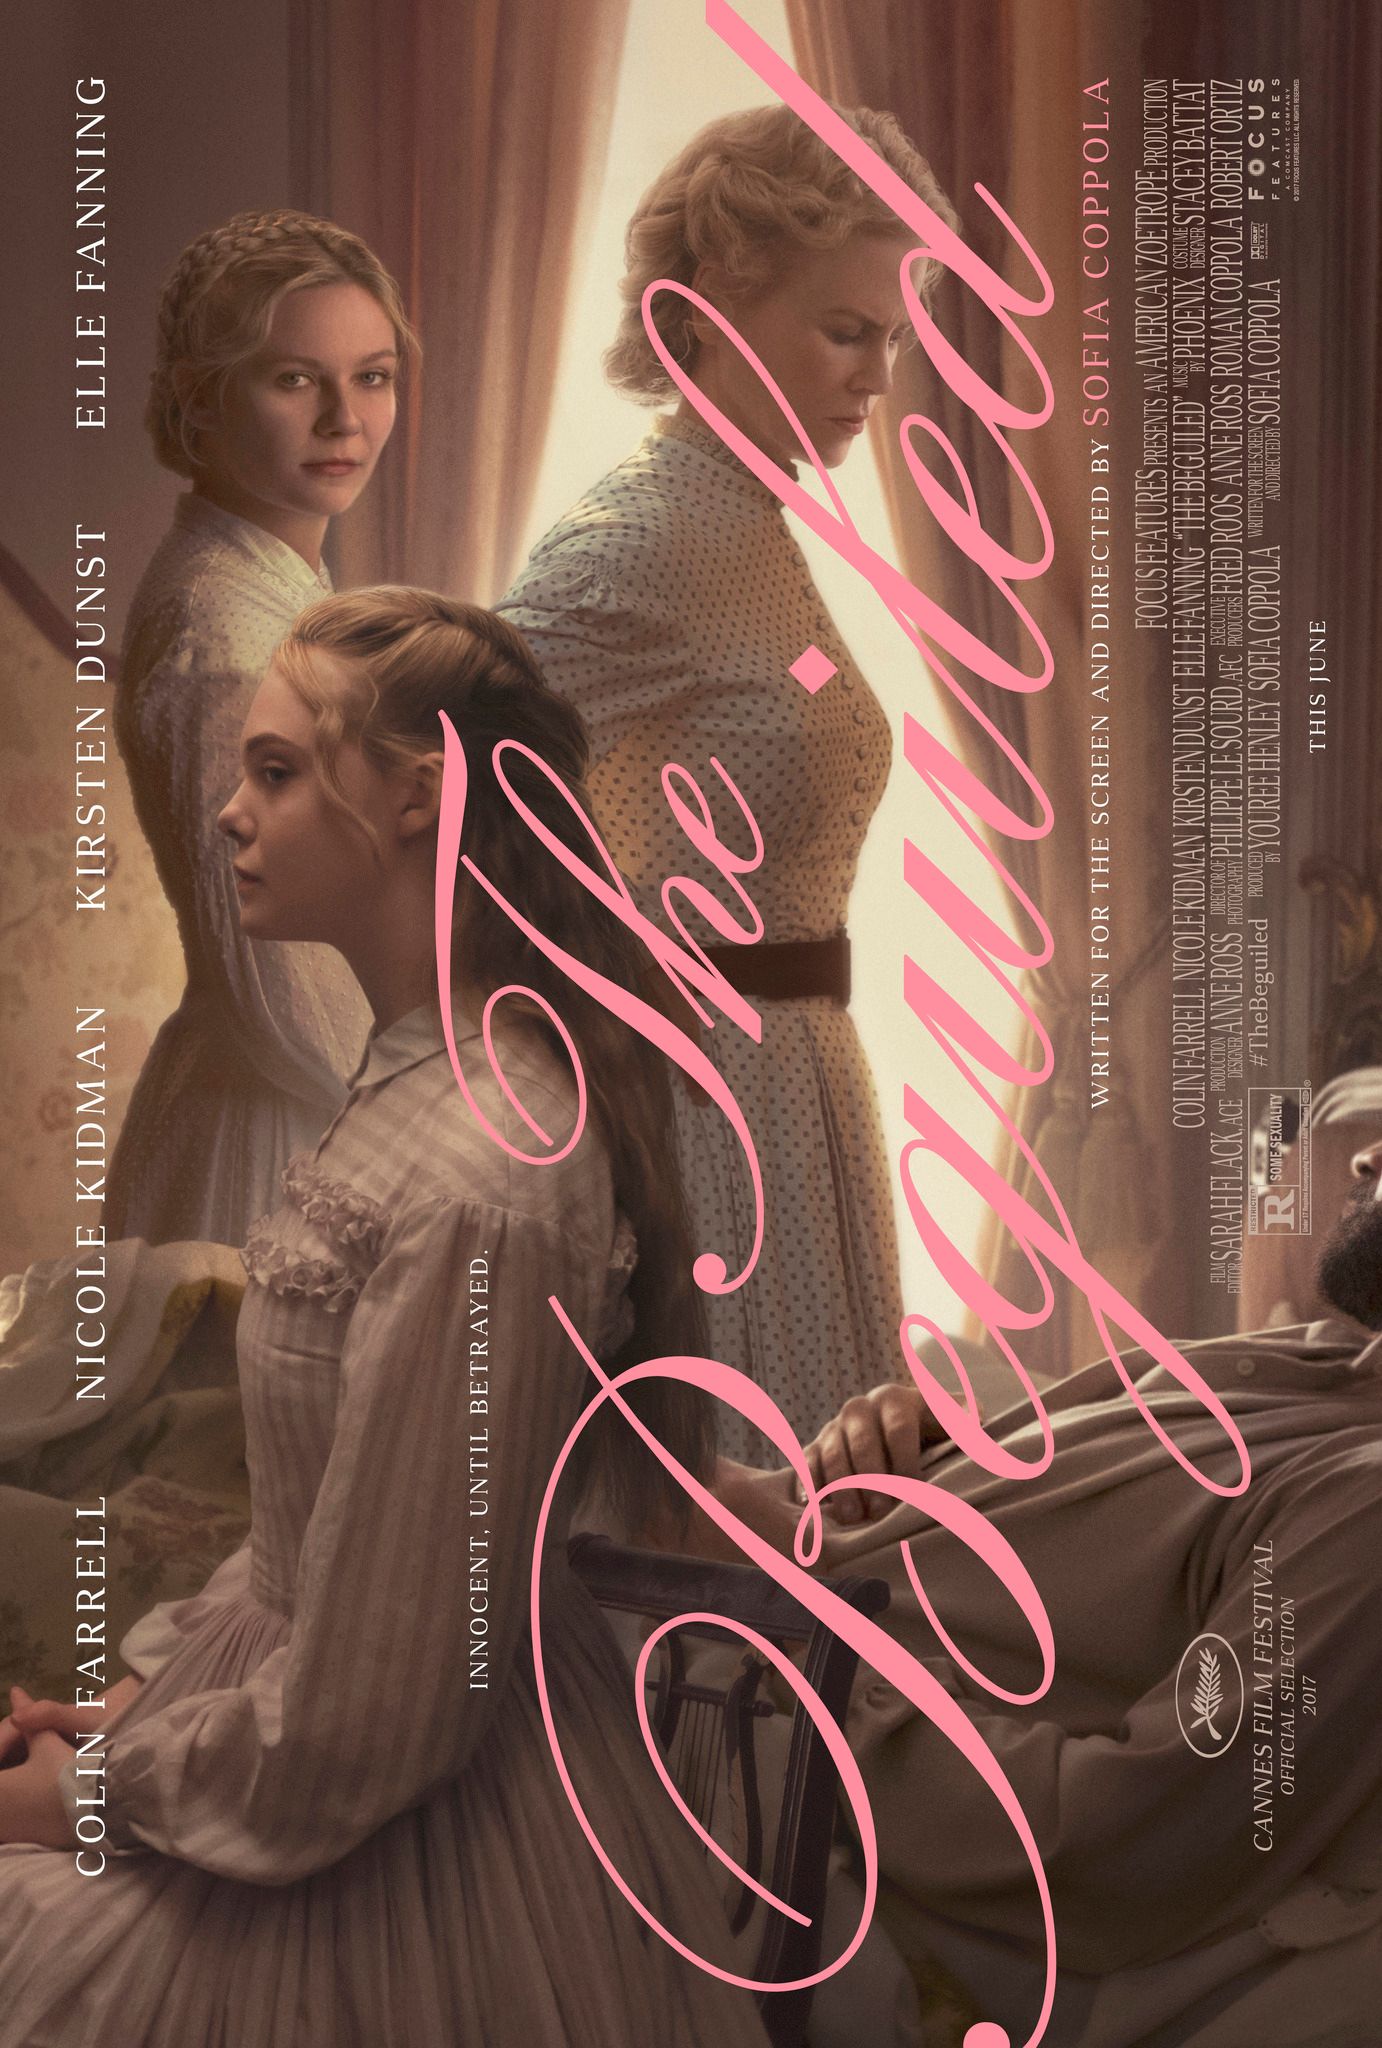 The Beguiled 2017 Film Poster